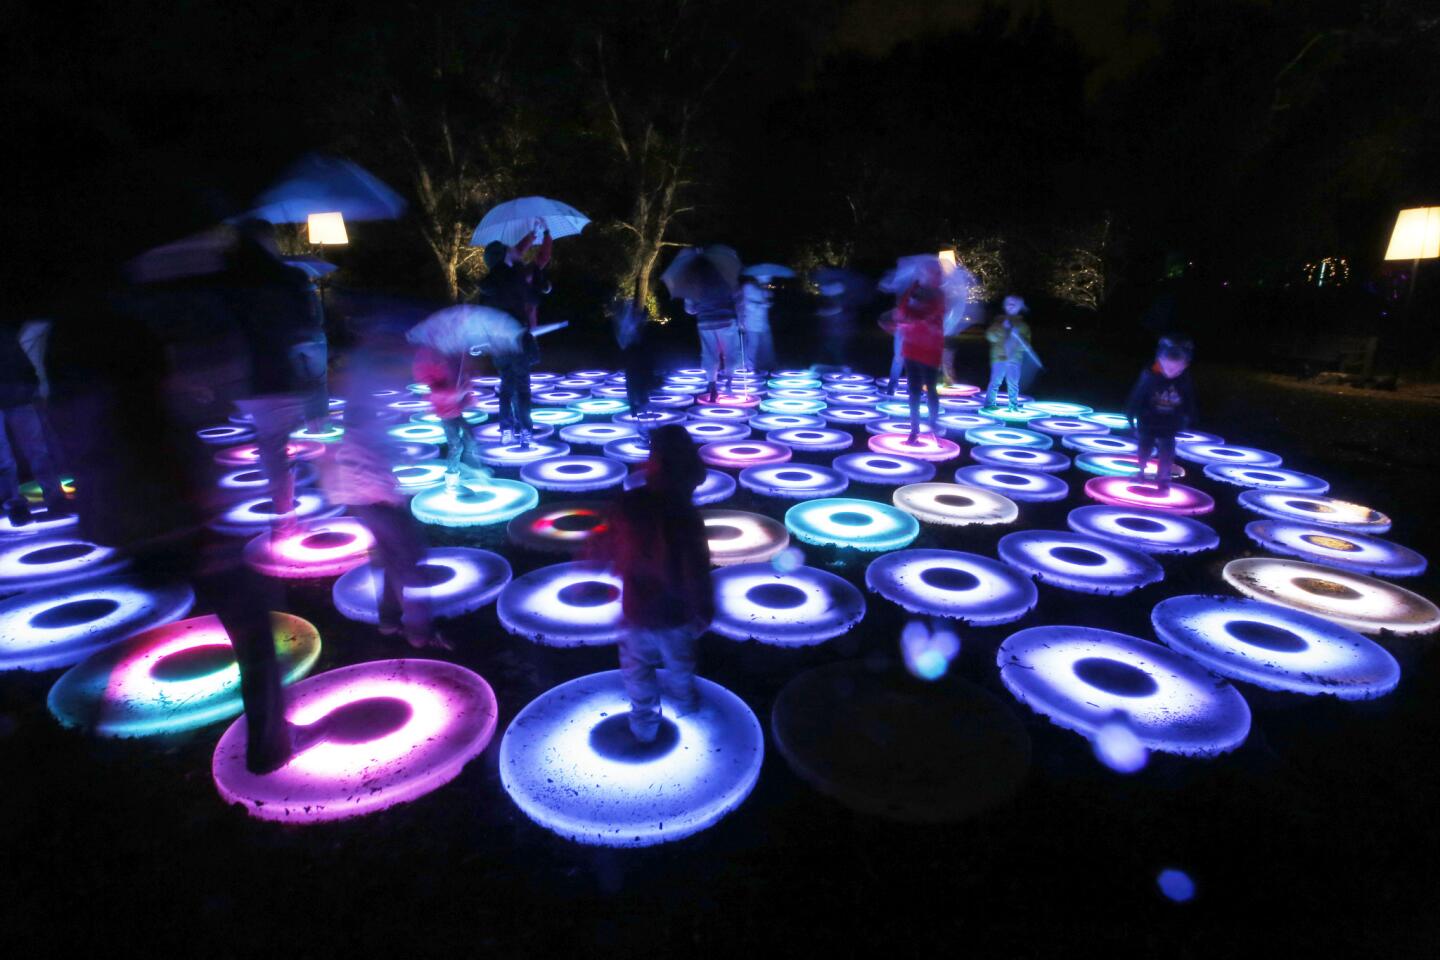 Visitors walk through the Descanso Gardens' “Enchanted: Forest of Light” in the rain Dec. 23.